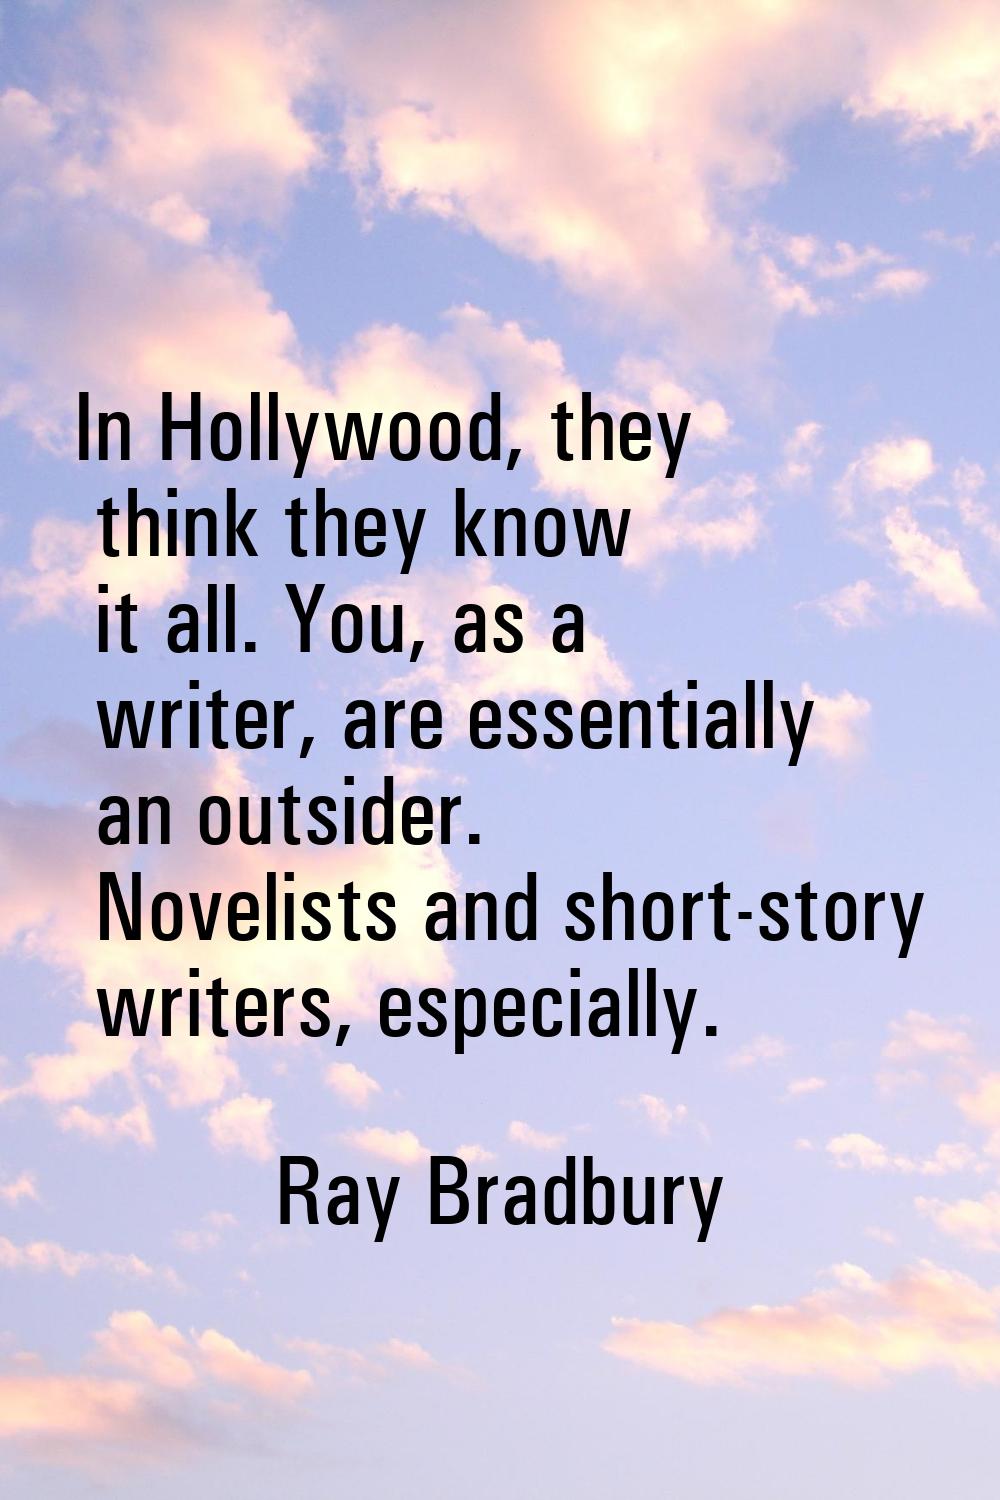 In Hollywood, they think they know it all. You, as a writer, are essentially an outsider. Novelists